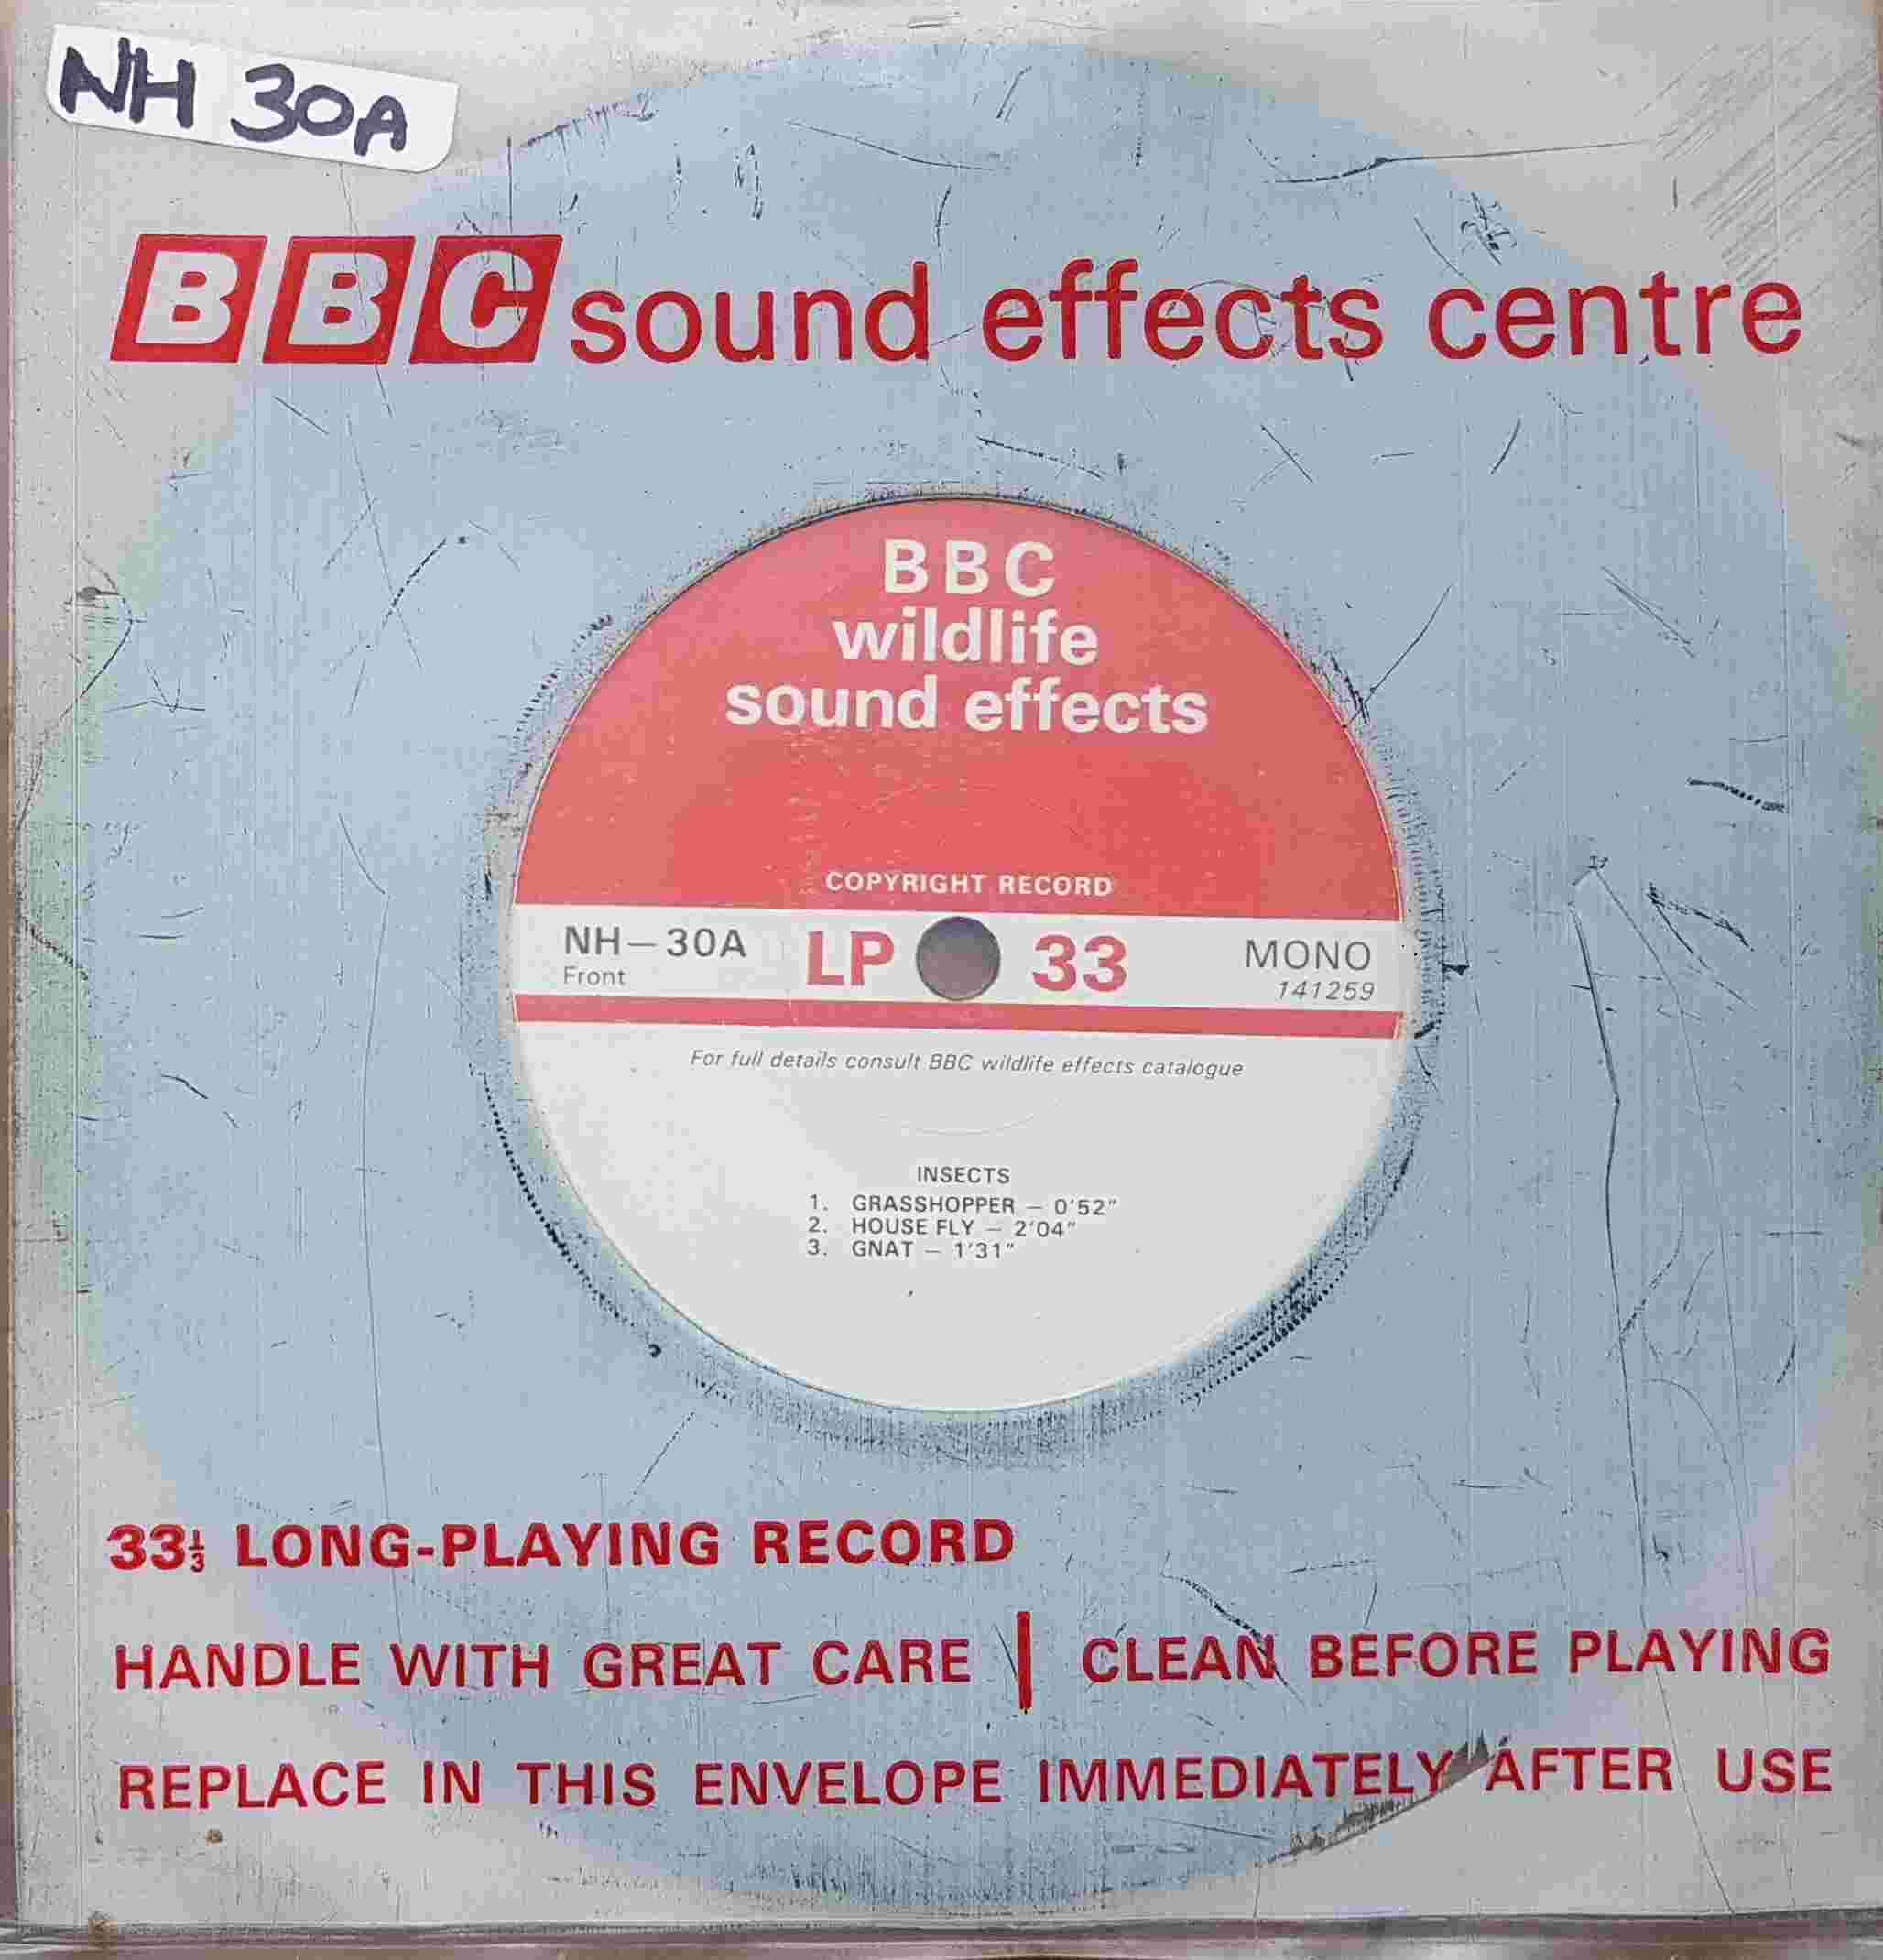 Picture of NH 30A Insects by artist Not registered from the BBC records and Tapes library